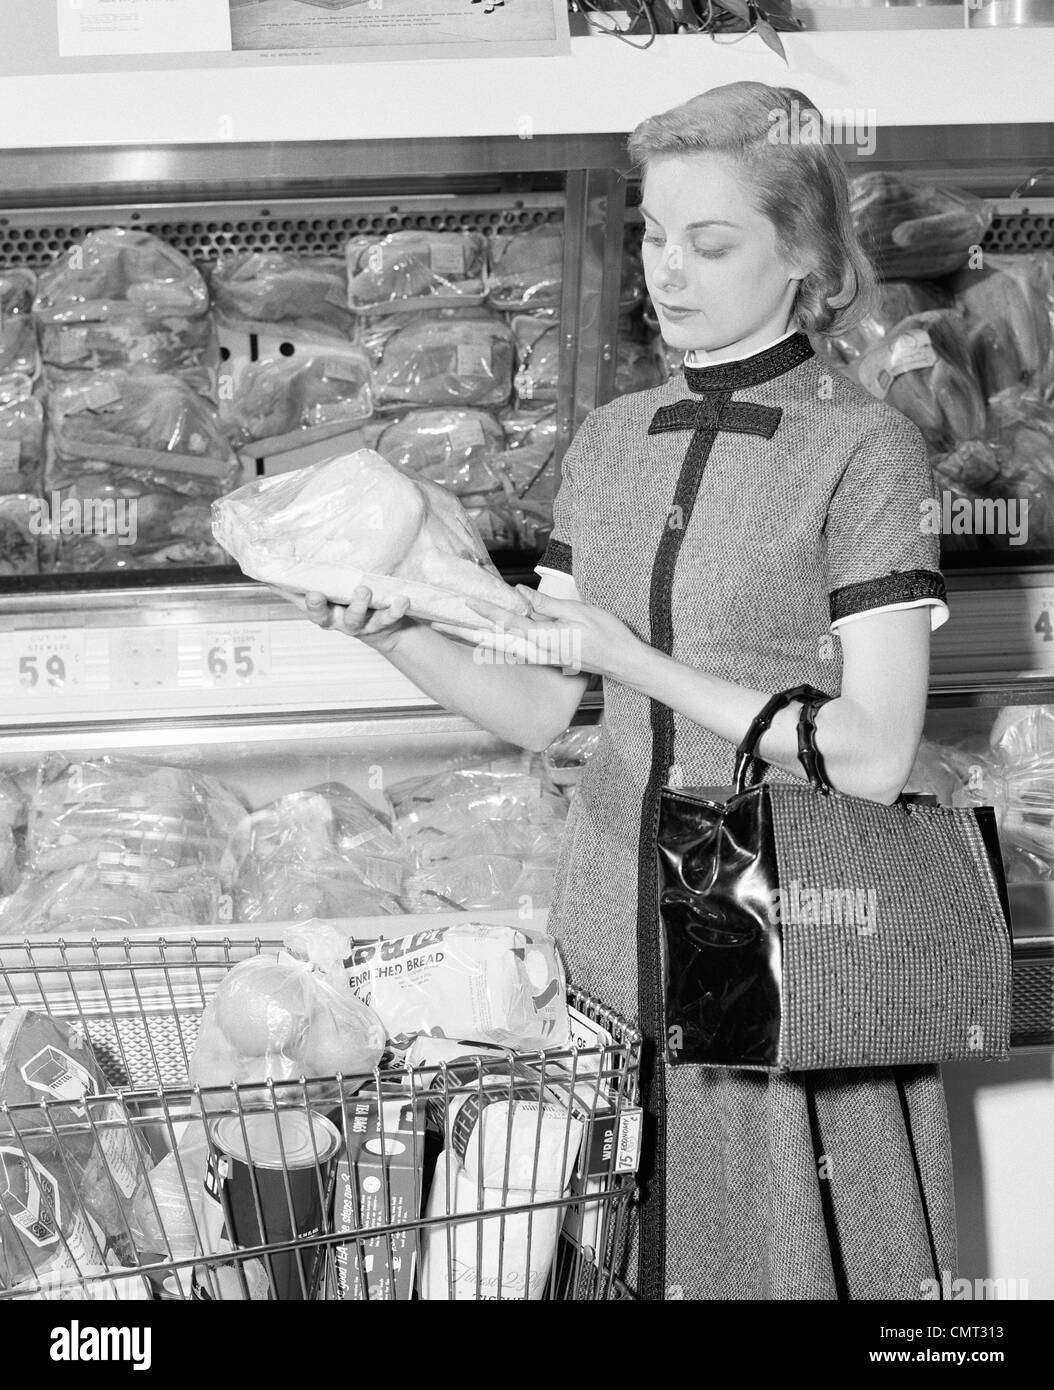 1950s 1960s BLOND WOMAN SELECTING POULTRY IN SUPERMARKET Stock Photo